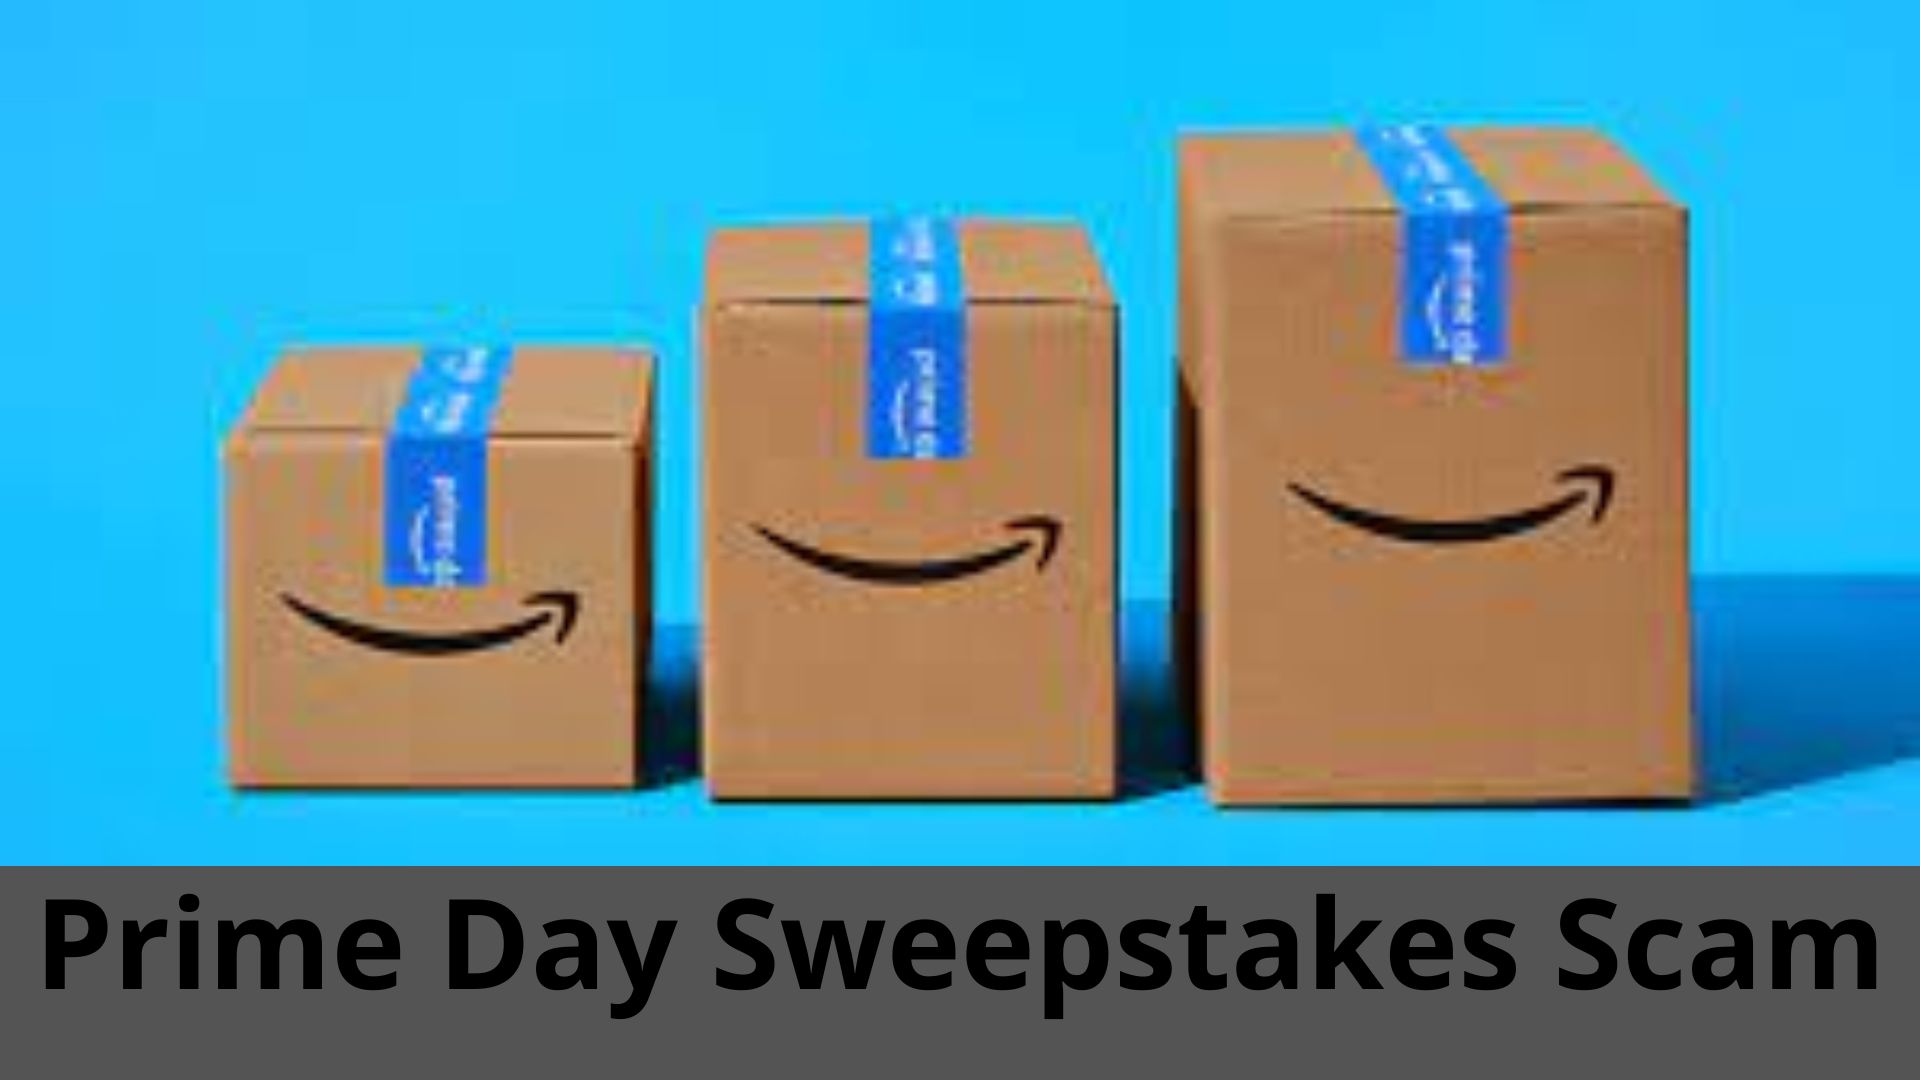 Prime Day Sweepstakes Scam